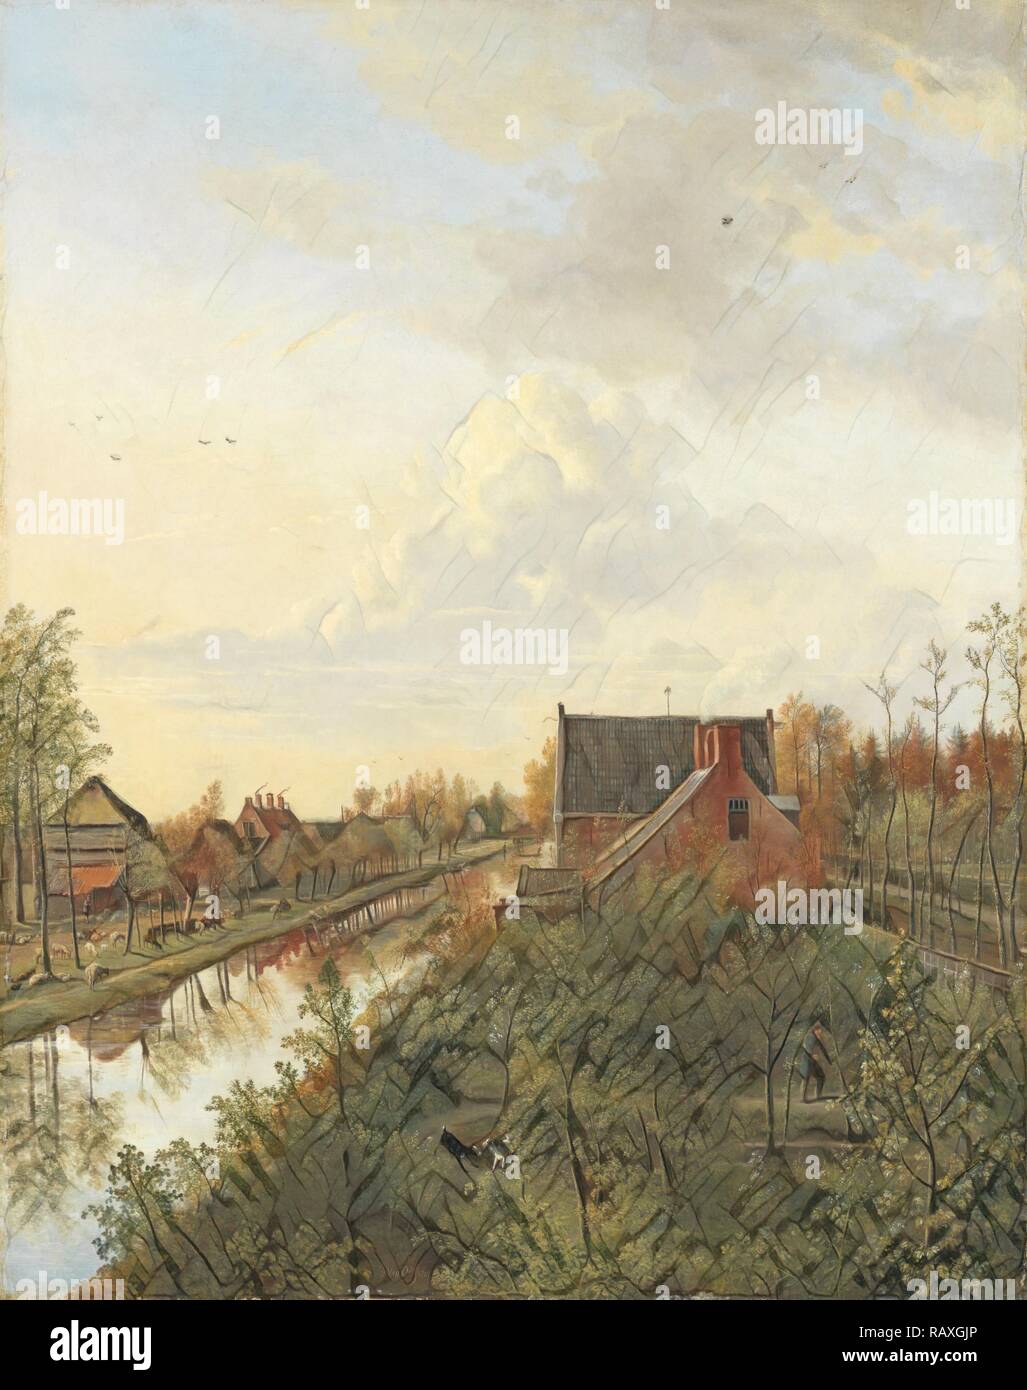 The Canal at ’s-Graveland, The Netherlands, Pieter Gerardus van Os, 1818. Reimagined by Gibon. Classic art with a reimagined Stock Photo